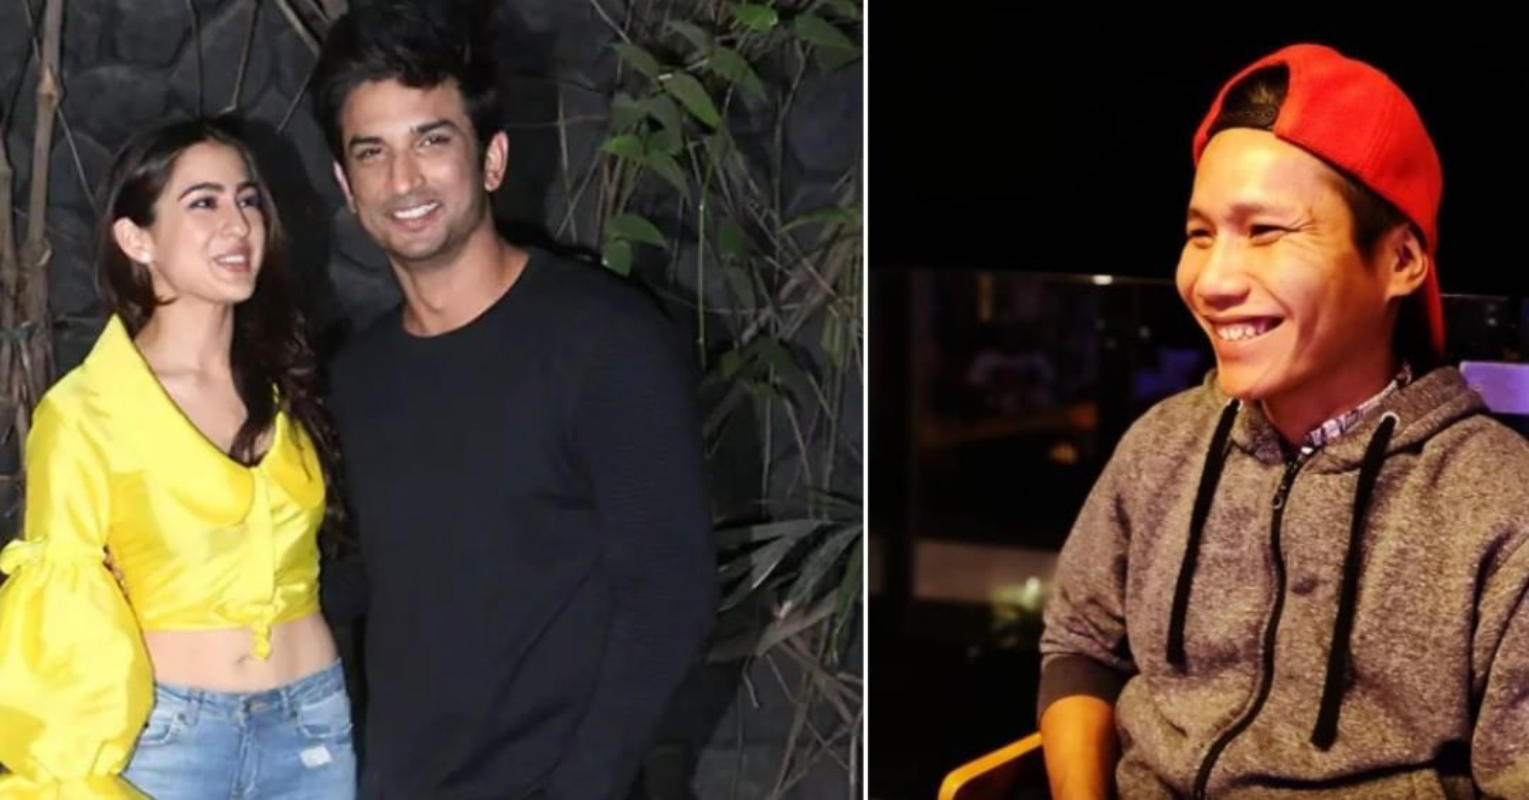 “Sushant and Sara were 'totally in love' during 'Kedarnath' promotions,” says Sushant’s friend Samuel Haokip